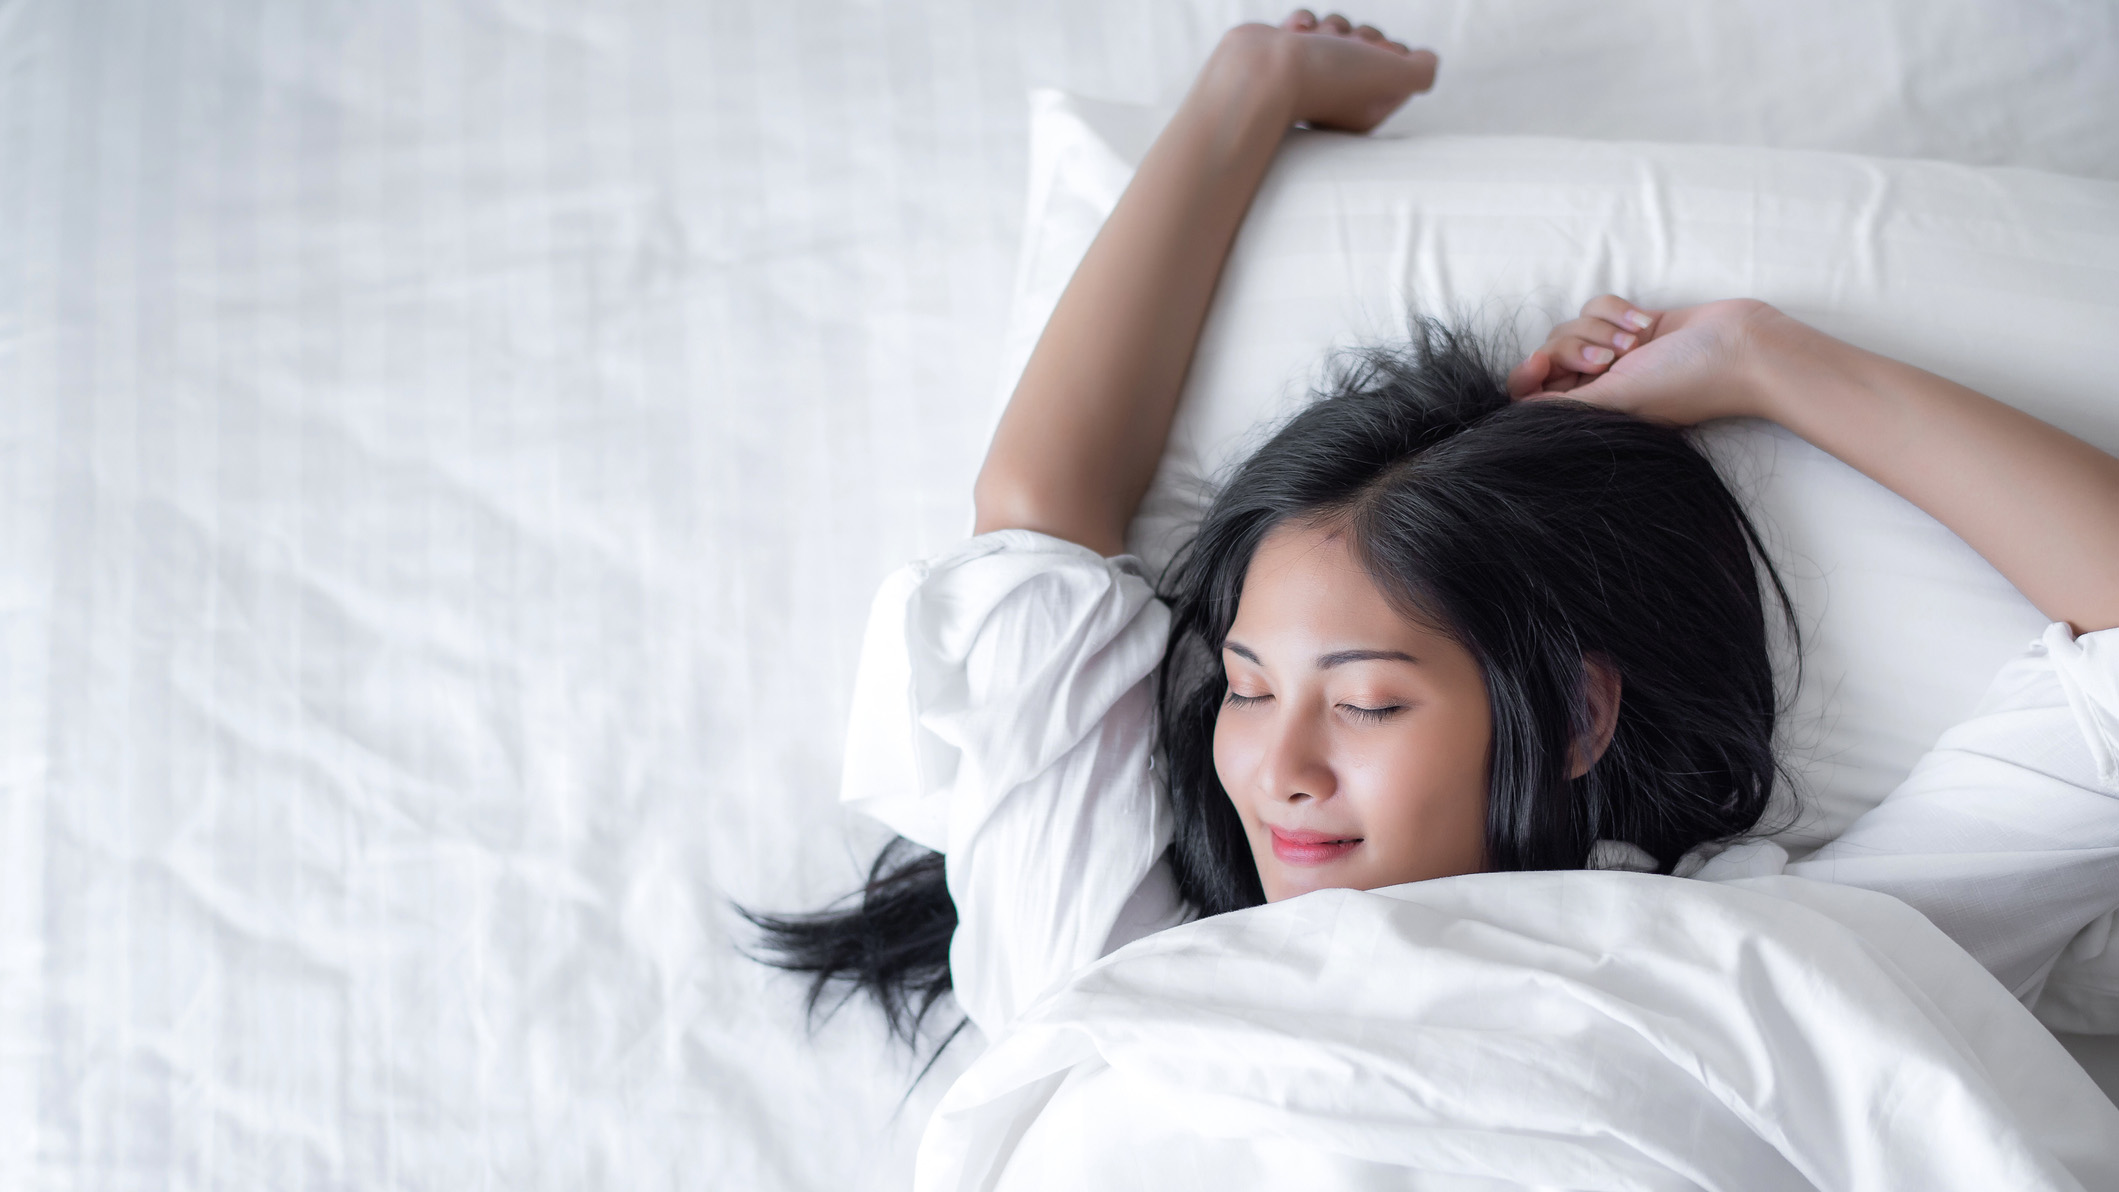 A woman sleeps happily with her arm raised on a comfortable white mattress